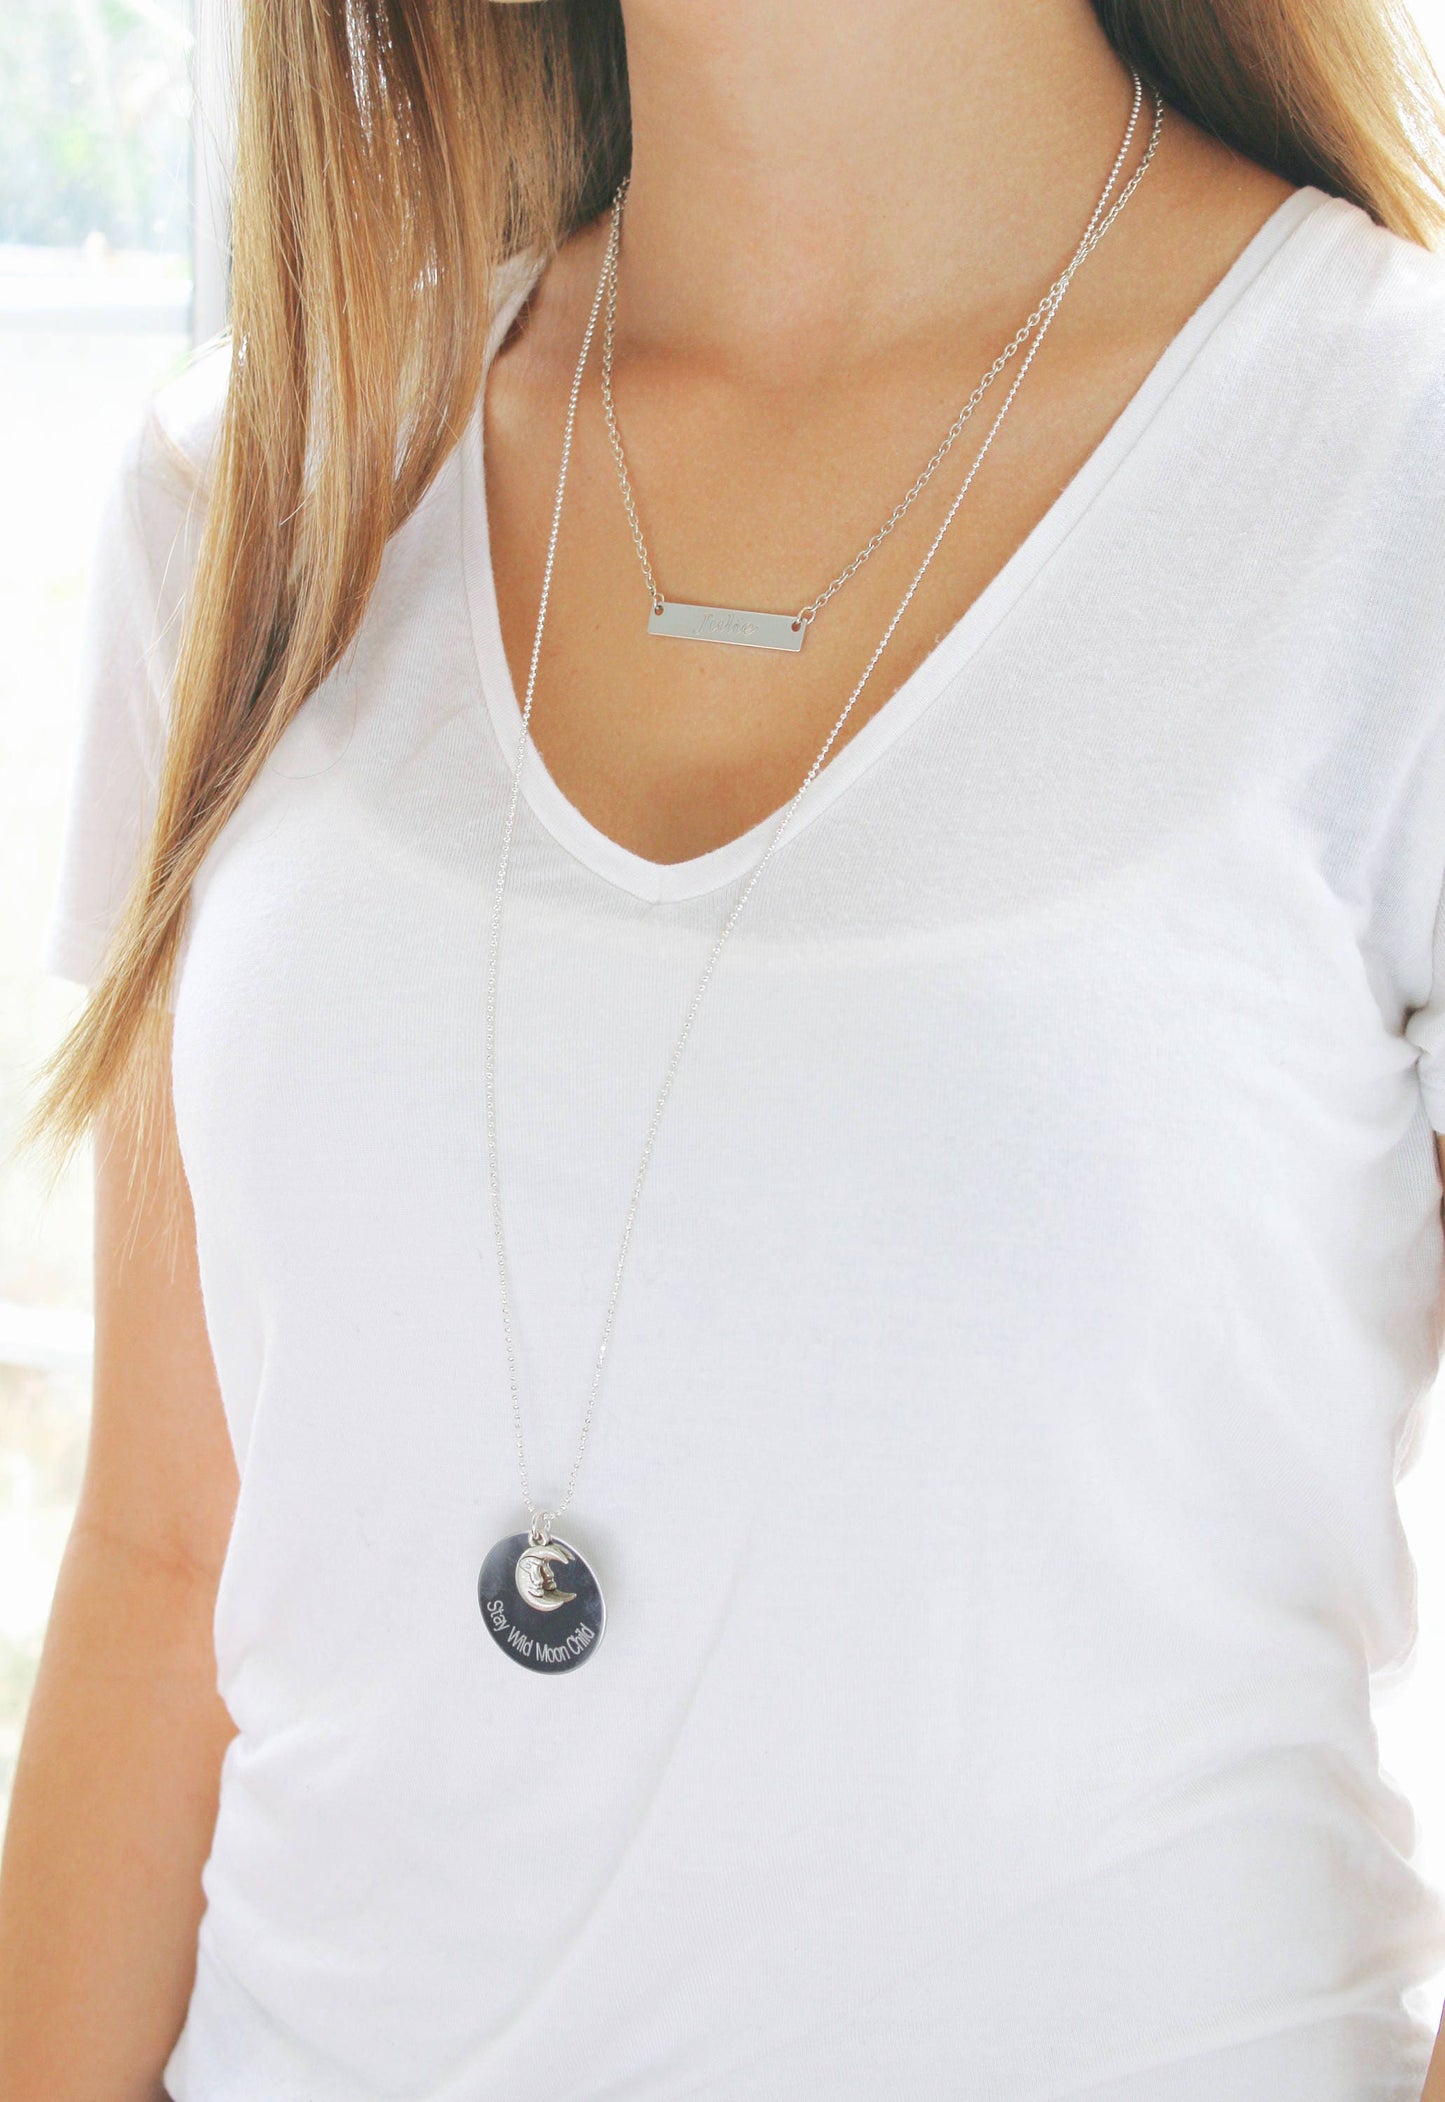 Stay Wild Moon Child - necklace, Silver crescent moon pendant